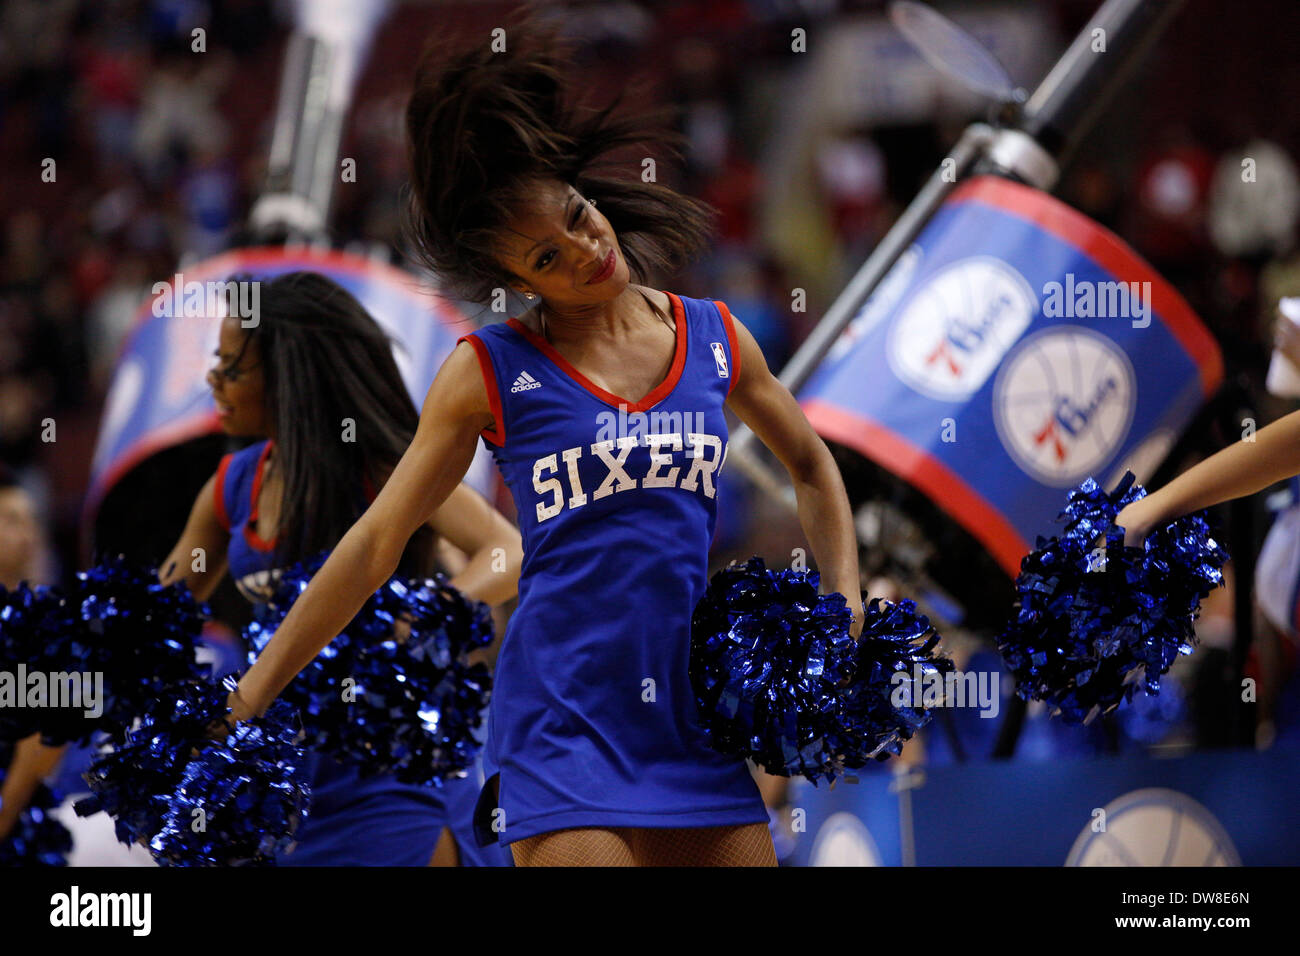 March 1, 2014: Philadelphia 76ers Dream Team performs during the NBA game between the Washington Wizards and the Philadelphia 76ers at the Wells Fargo Center in Philadelphia, Pennsylvania. The Wizards won 122-103. (Christopher Szagola/Cal Sport Media) Stock Photo